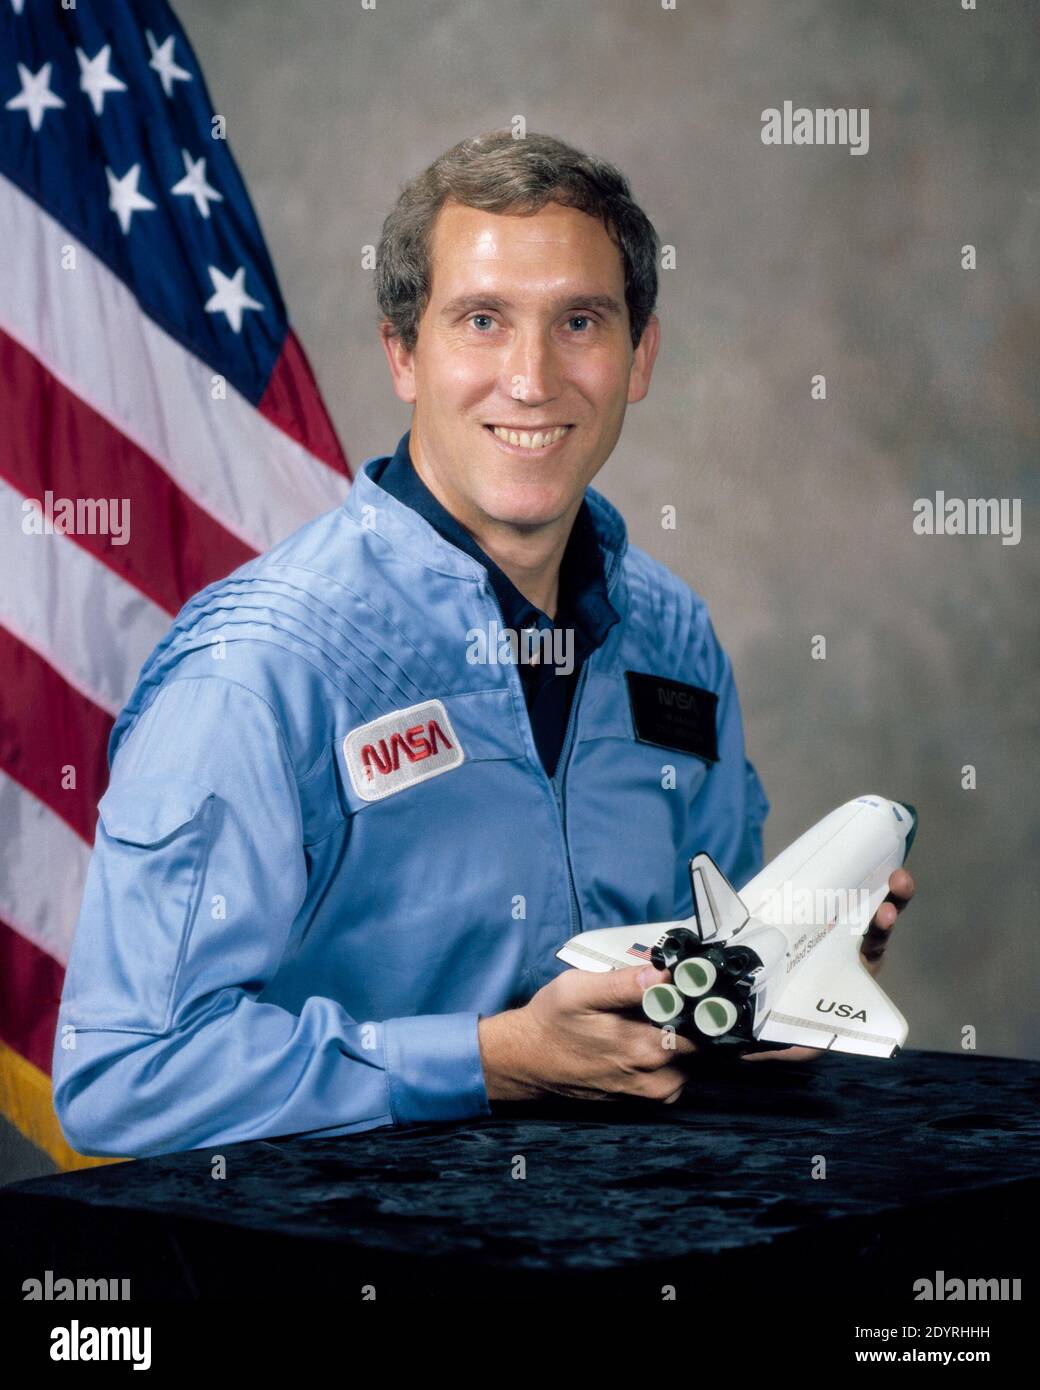 Michael John Smith (April 30, 1945 – January 28, 1986), (Capt, USN), American engineer and astronaut. He served as the pilot of the Space Shuttle Challenger when it was destroyed during the STS-51-L mission, when it broke up 73 seconds into the flight, and at an altitude of 48,000 feet (14.6 km), killing all 7 crew members. Smith's voice was the last one heard on the Challenger voice recorder. He was a Master of Science who held a degree in Aeronautical Engineering. Stock Photo